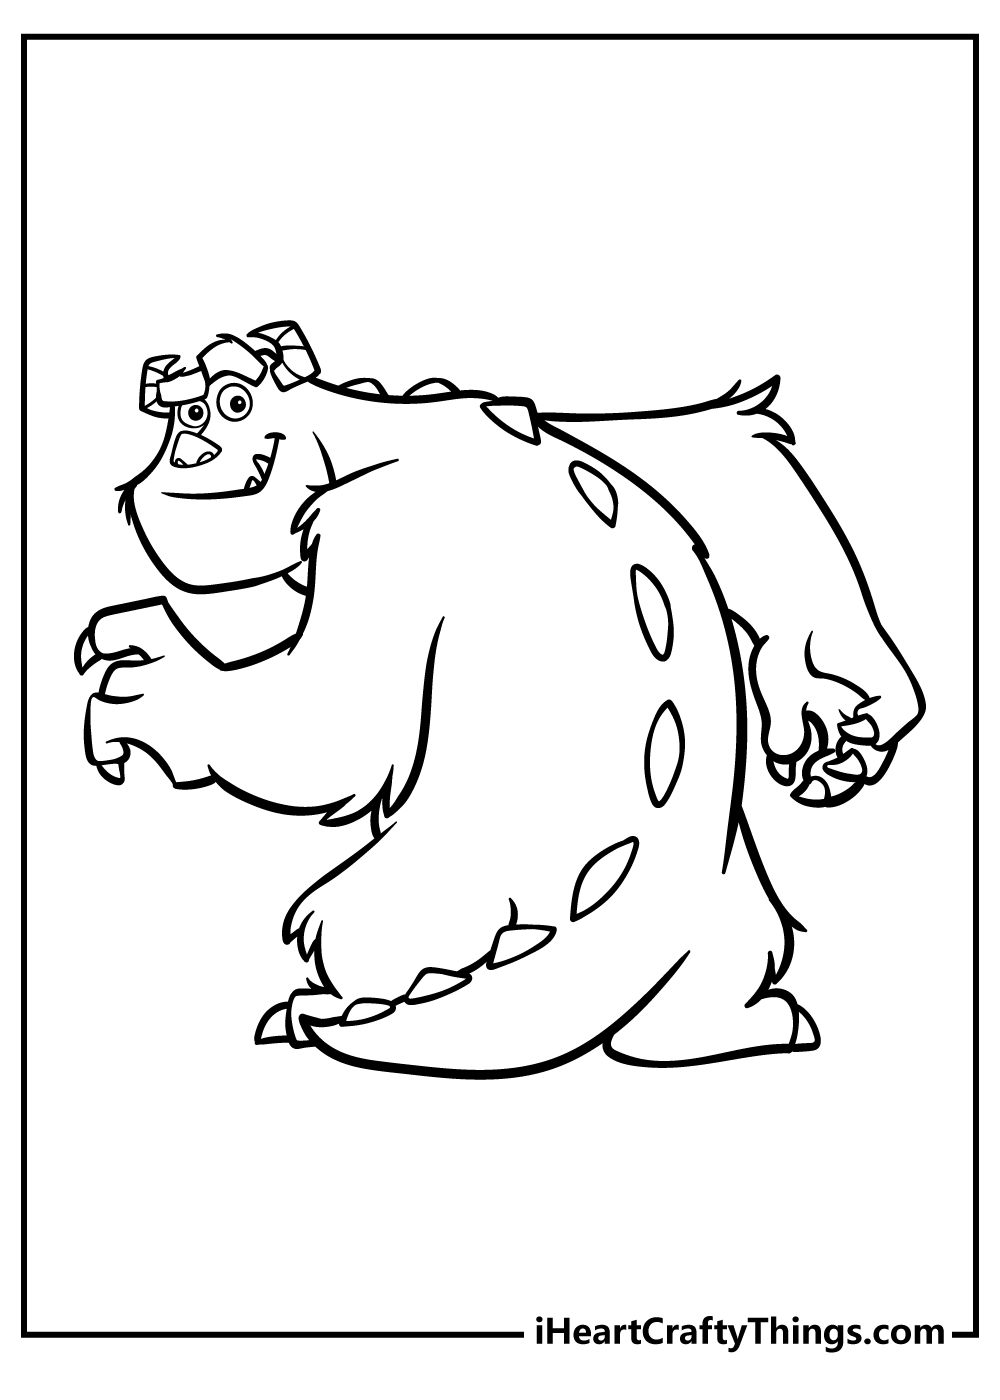 Monsters Inc. Coloring Pages free pdf download